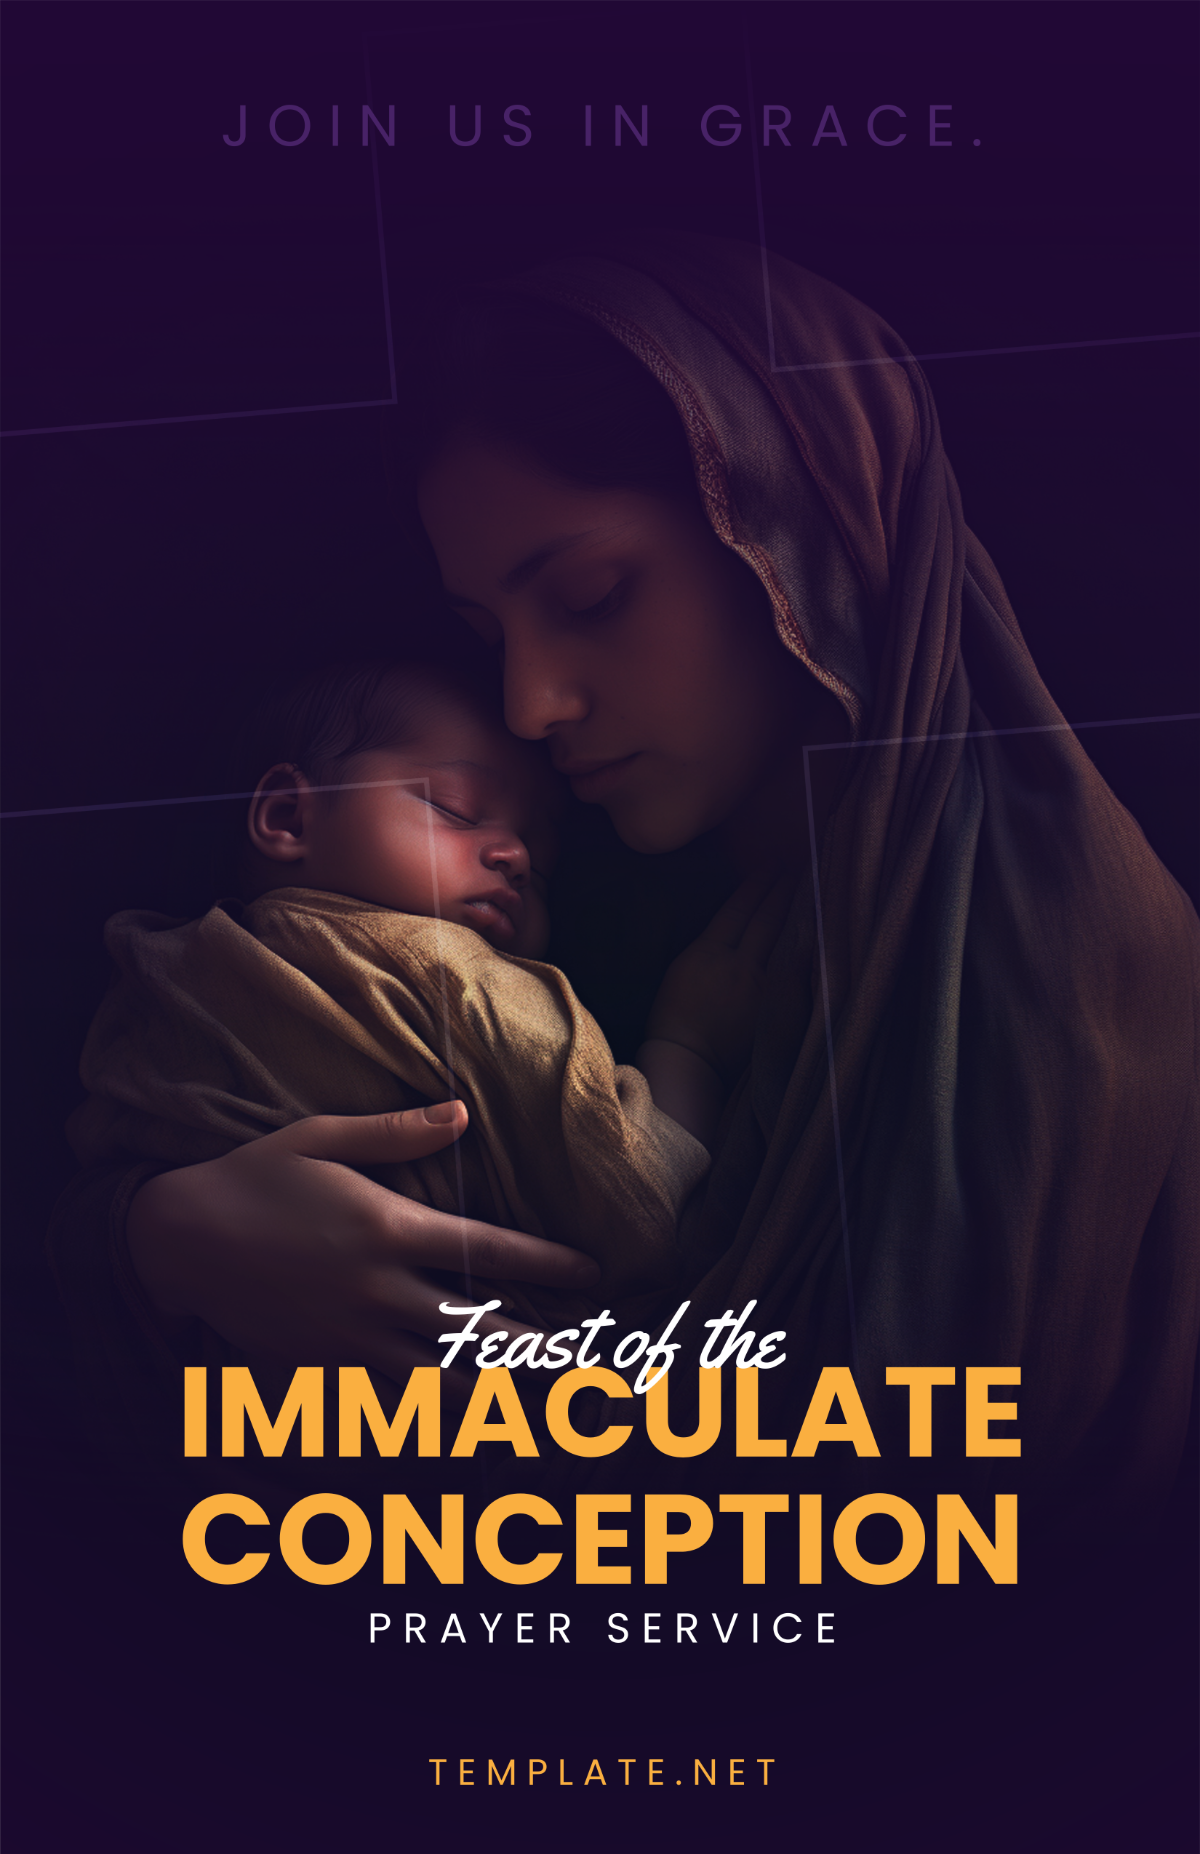 Feast of Immaculate Conception Prayer Service Poster Template